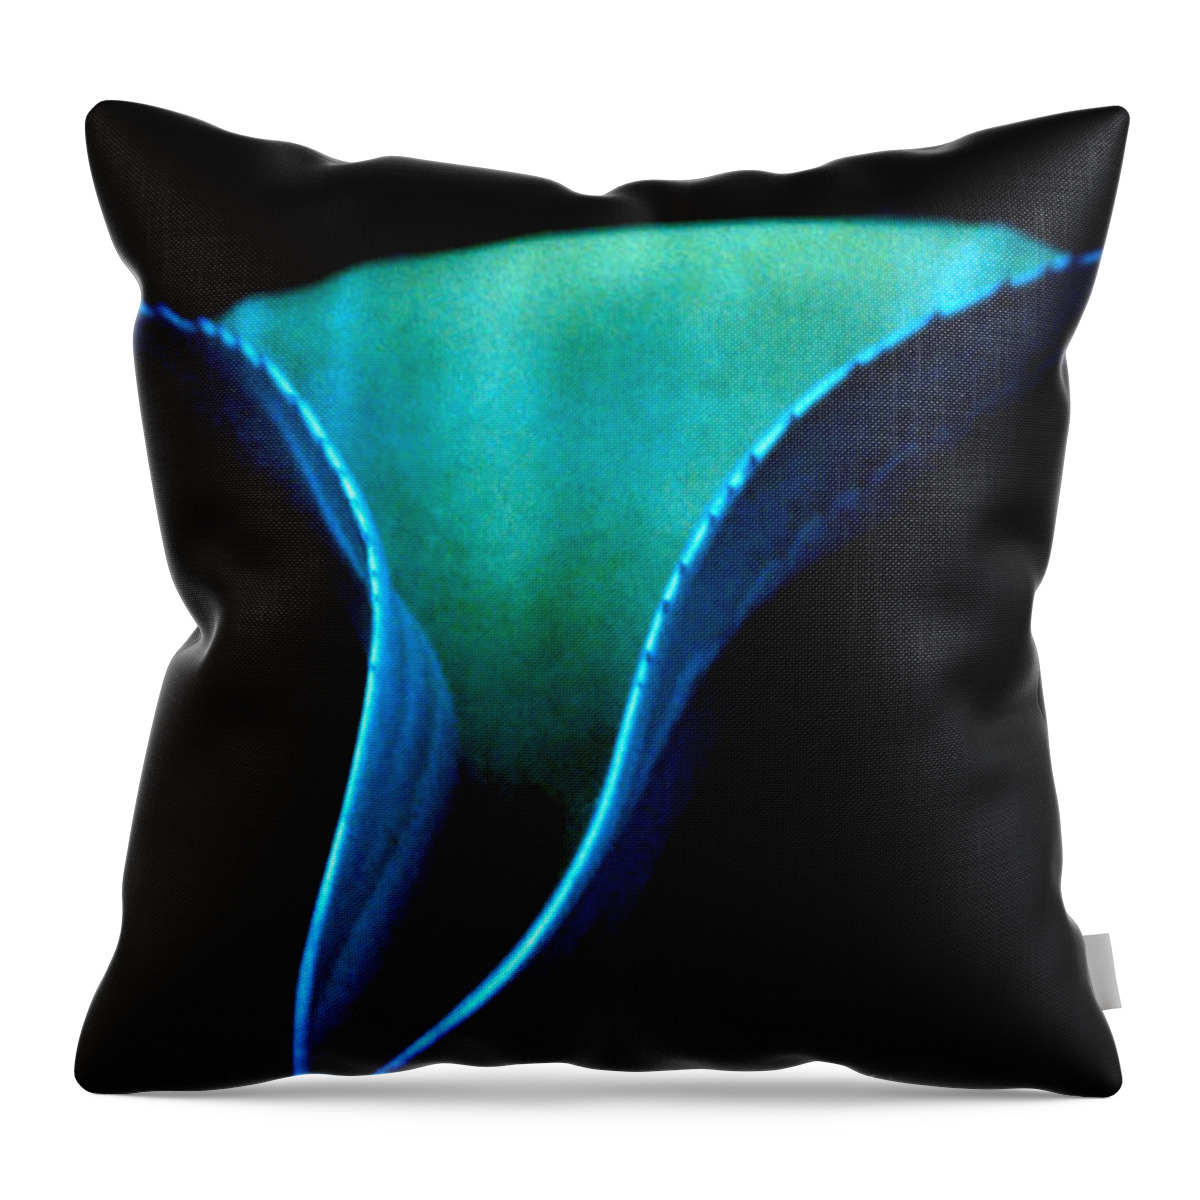 Blue Agave Leaf Succulent Century Plant Blue Turquoise Green Black Leaves Plant Vegetation Arizona Scottsdale Phoenix Tucson Desert Botanical Garden Triangle Point Pointy Throw Pillow featuring the photograph Blue Agave Vertical by Heather Kirk